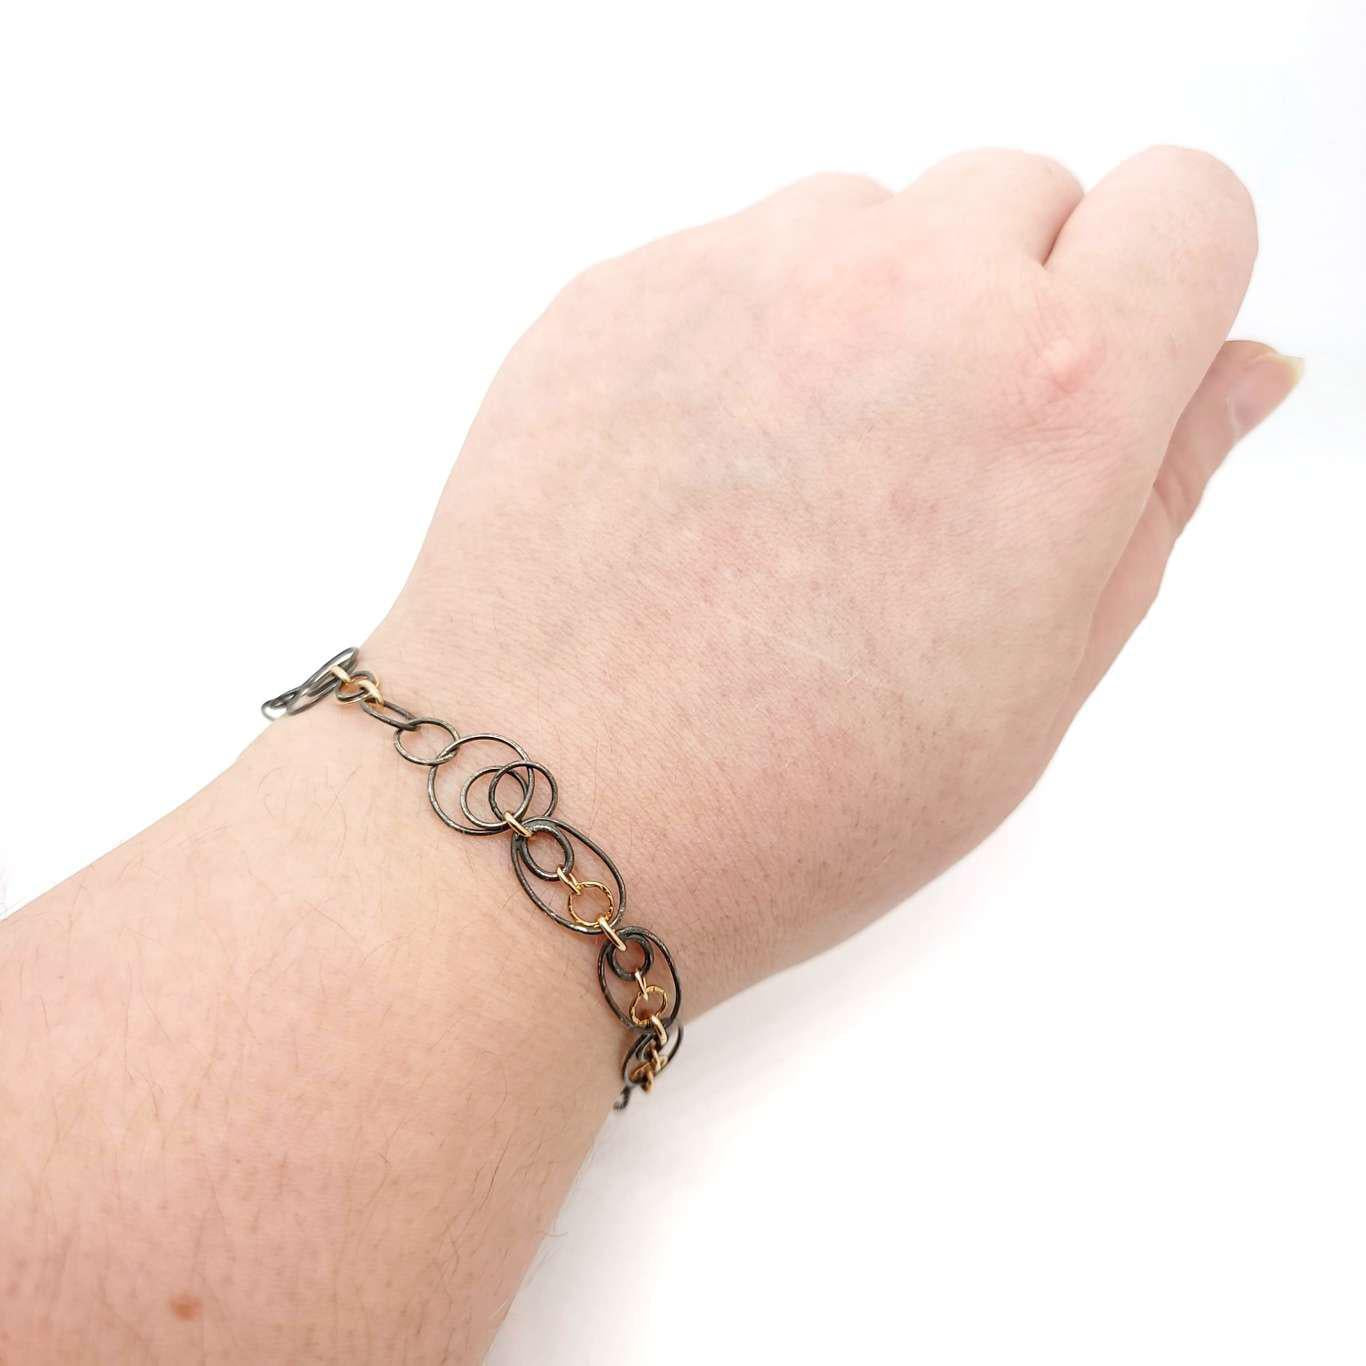 Bracelet - Intertwined Circles and Ovals by Calliope Jewelry